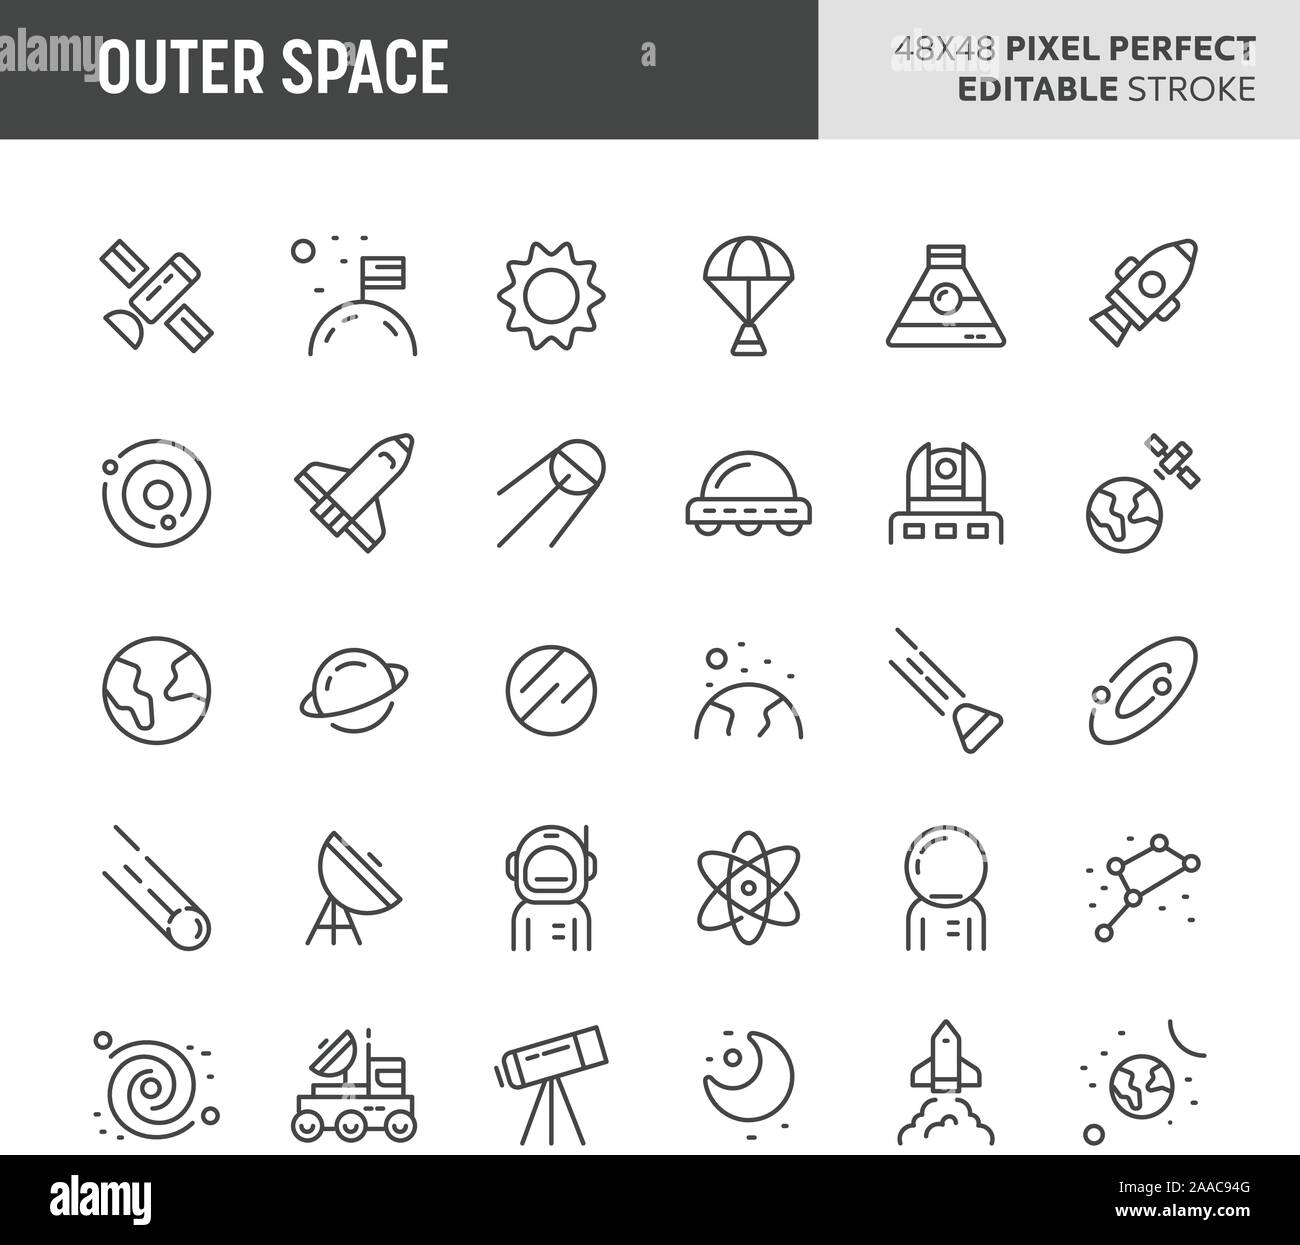 30 thin line icons associated with outer space. Symbols such as planets, galaxy, solar system & space transportation are included in this set. 48x48 p Stock Vector